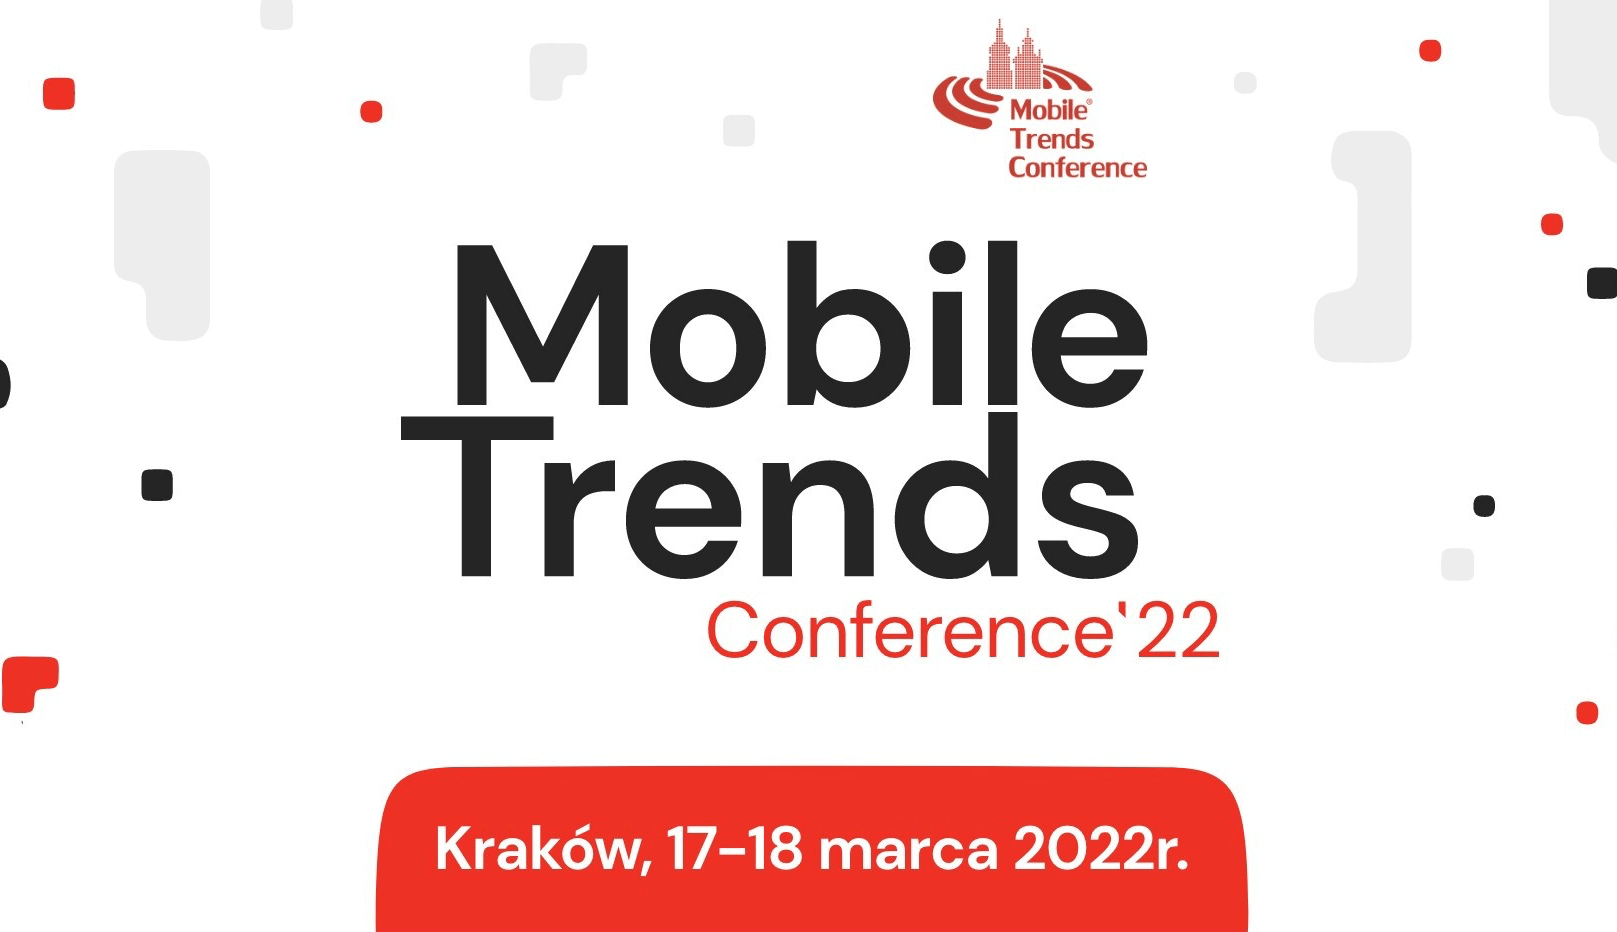 Mobile Trends Conference & Awards 2022